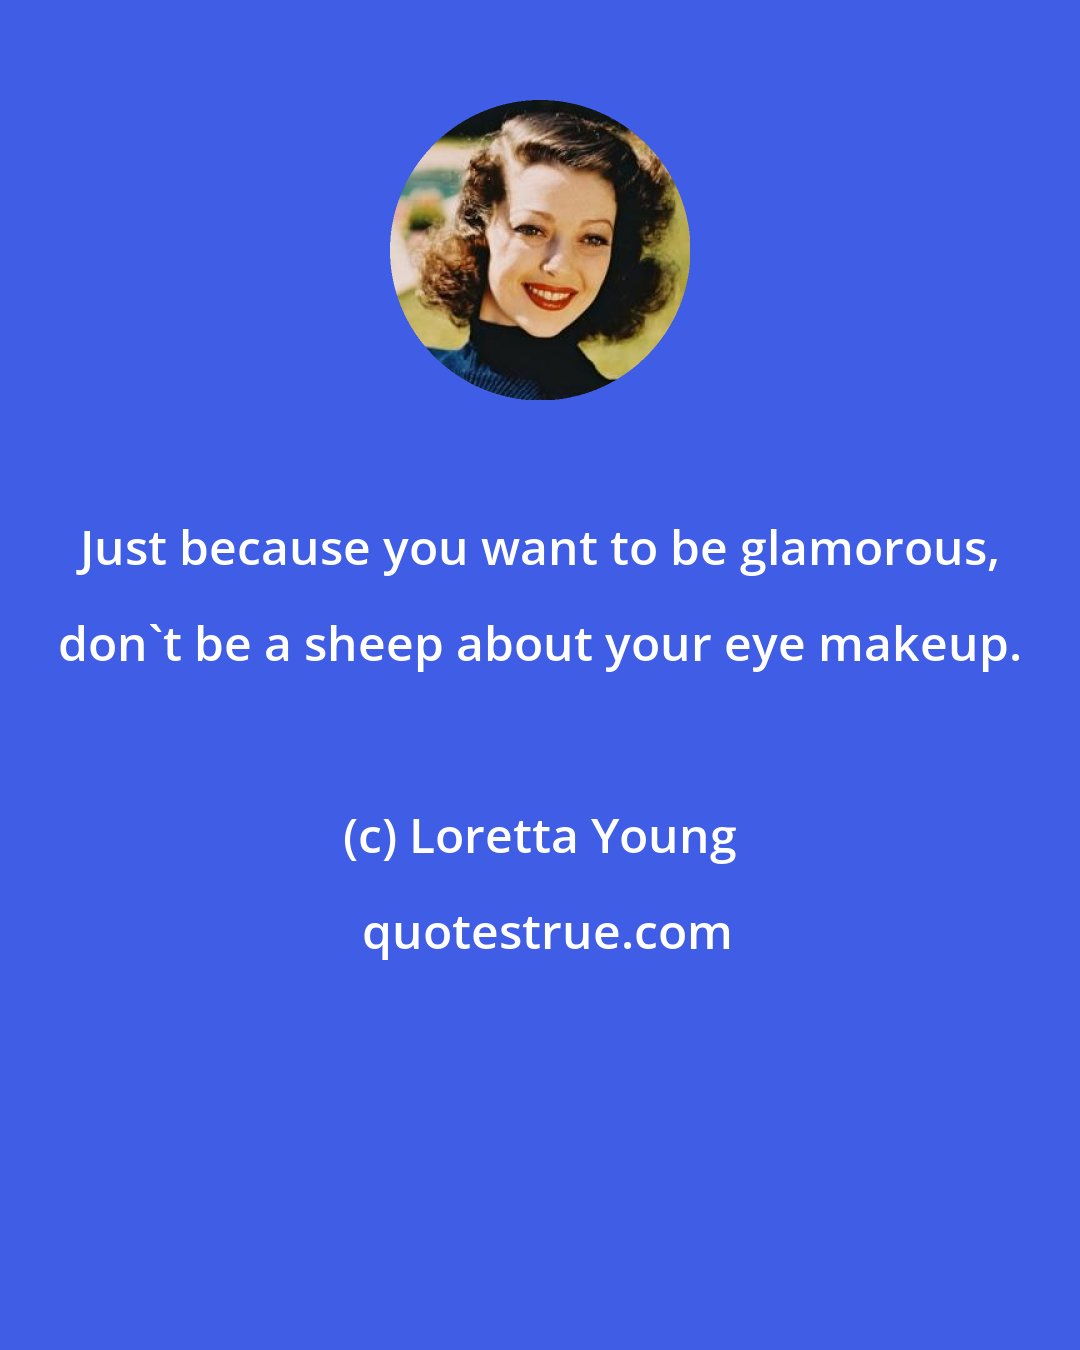 Loretta Young: Just because you want to be glamorous, don't be a sheep about your eye makeup.